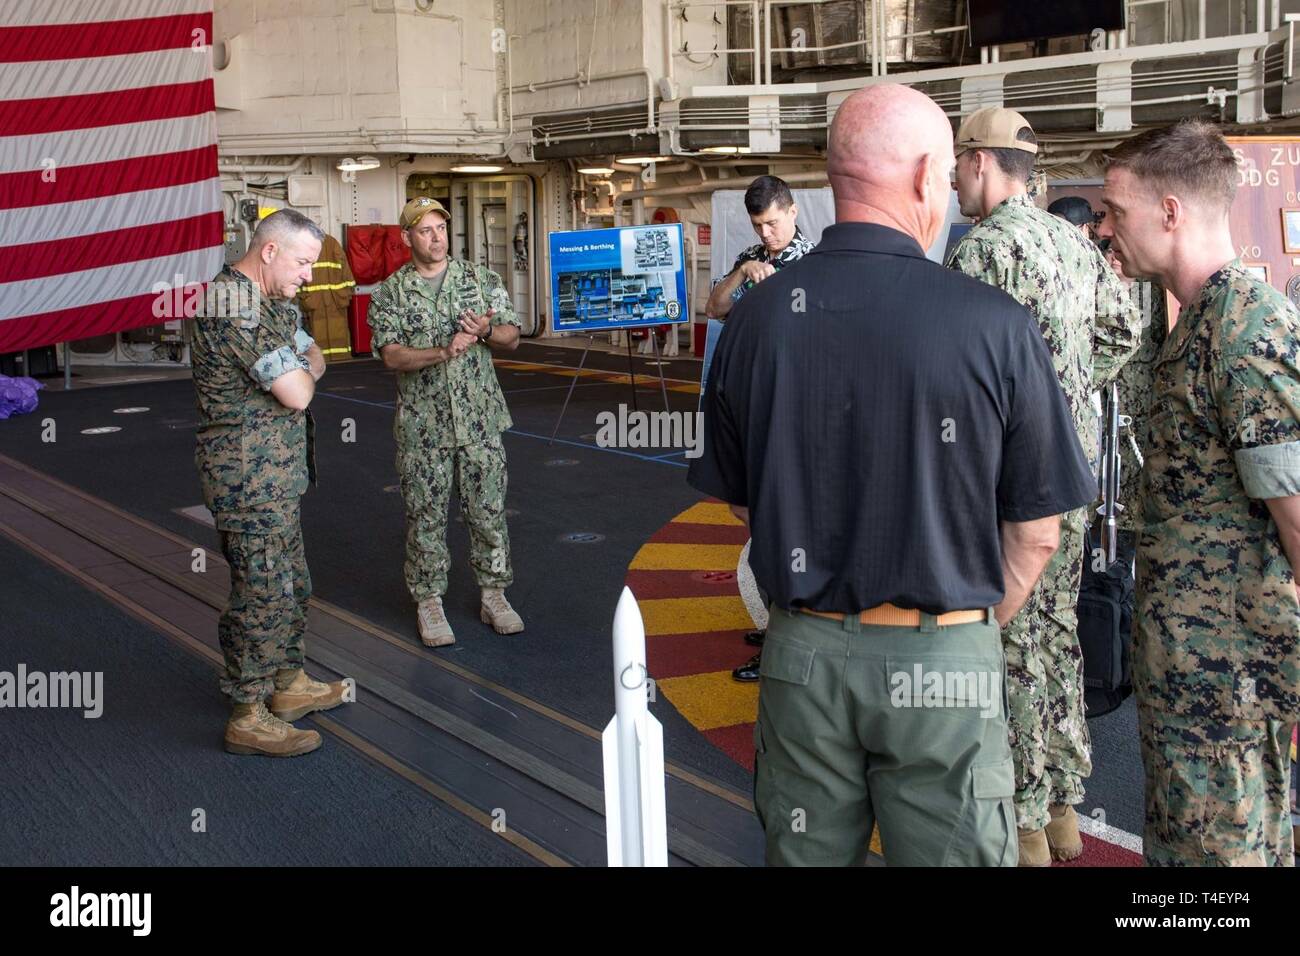 PEARL HARBOR, Hawaii (Apr. 5, 2019) Capt. Carl Andrew Carlson, commanding officer of guided-missile destroyer USS Zumwalt (DDG 1000), speaks during a tour of the ship with Brig. Gen. Robert Sofge, deputy commander, U.S. Marine Corps Forces, Pacific. Zumwalt is conducting the port visit as part of its routine operations in the eastern Pacific. Zumwalt-class destroyers provide the Navy with agile military advantages at sea and with ground forces ashore. Stock Photo